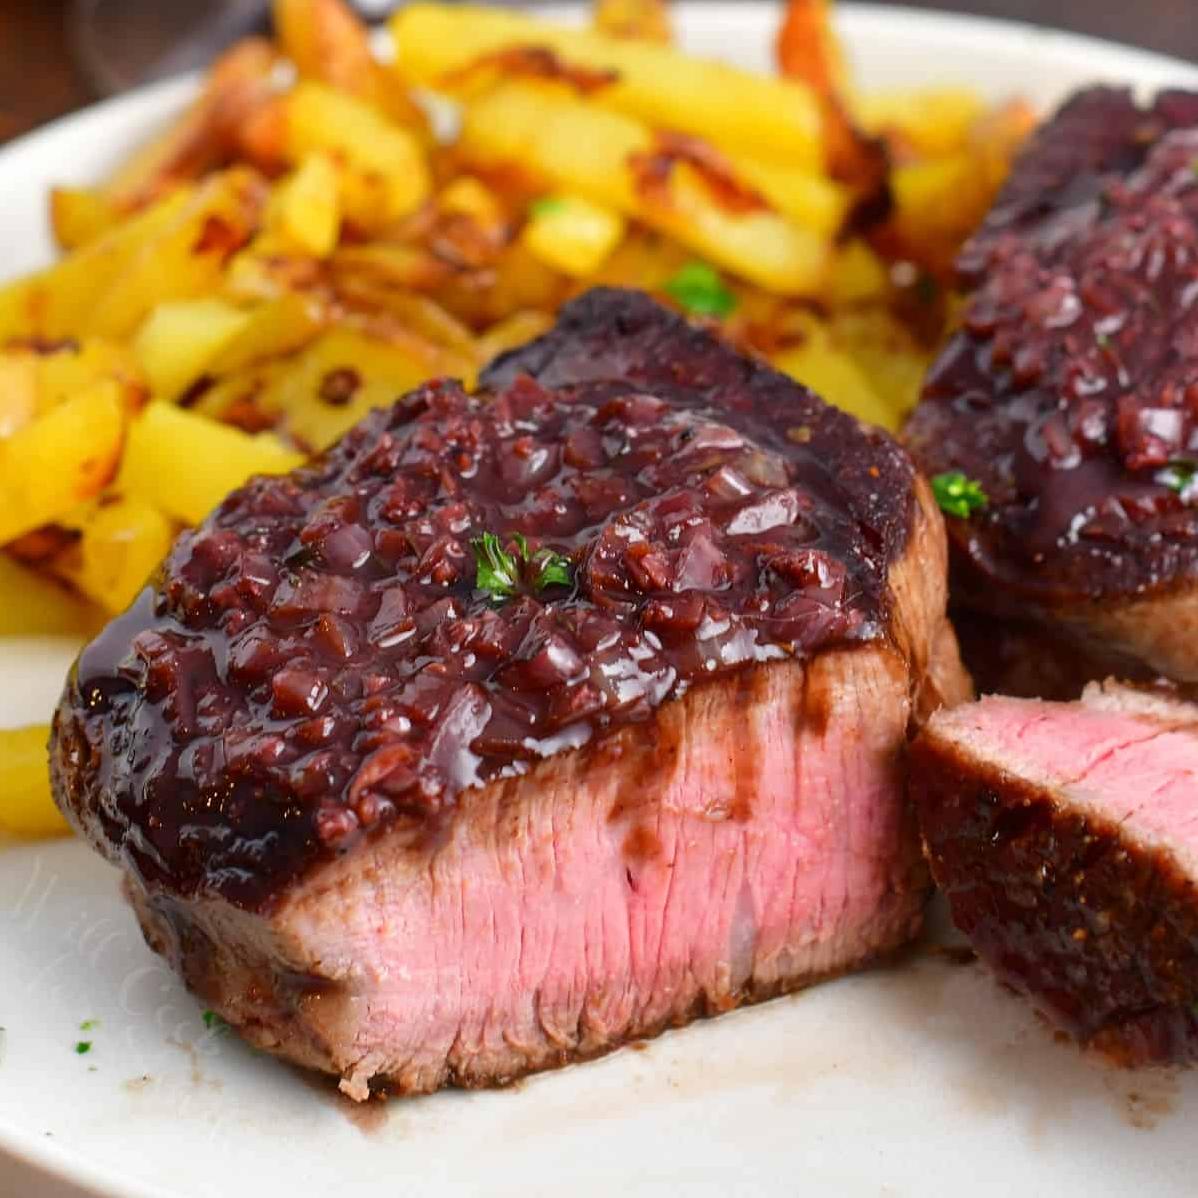  The red-wine sauce complements the steak so well, you'll forget you're not at a fancy restaurant.